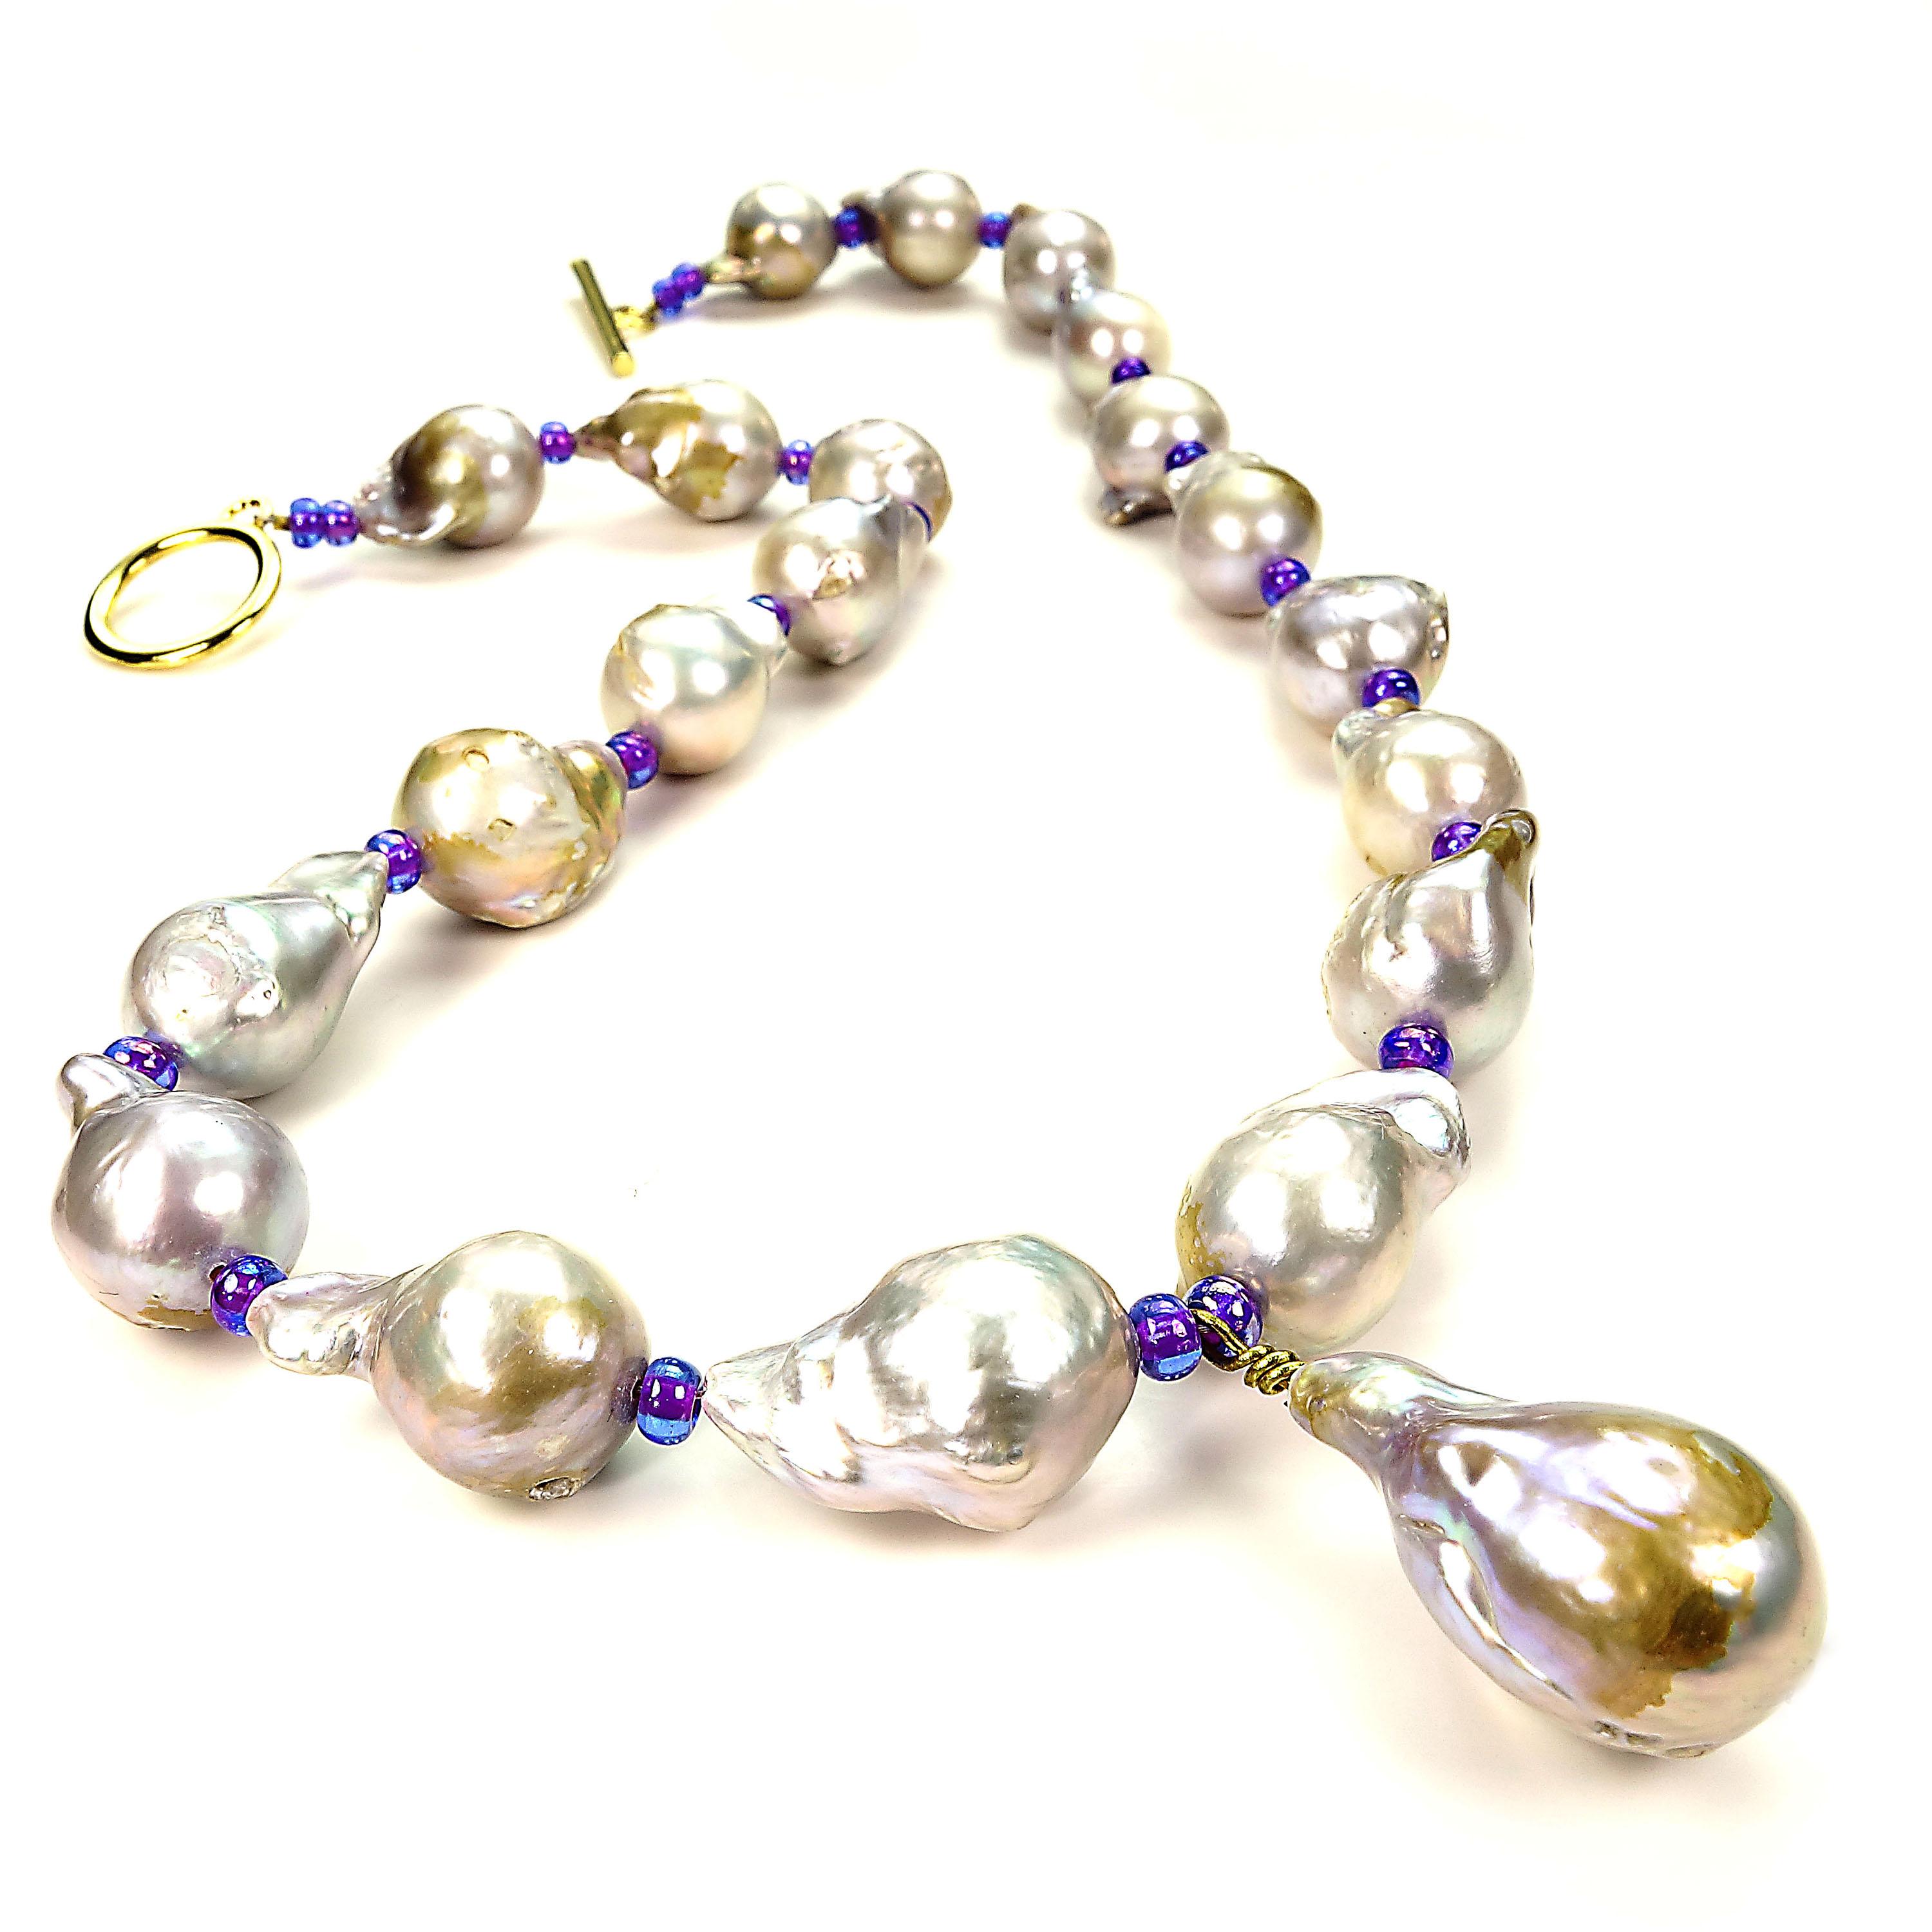 
Custom made, romantic silvery Baroque Pearl Necklace with purple sparkly spacers accenting the iridescent pearls with brown accents. Pearl are approximately 18x13mm, one has pearl seed showing through to surface. Gold tone toggle clasp. 19 inches